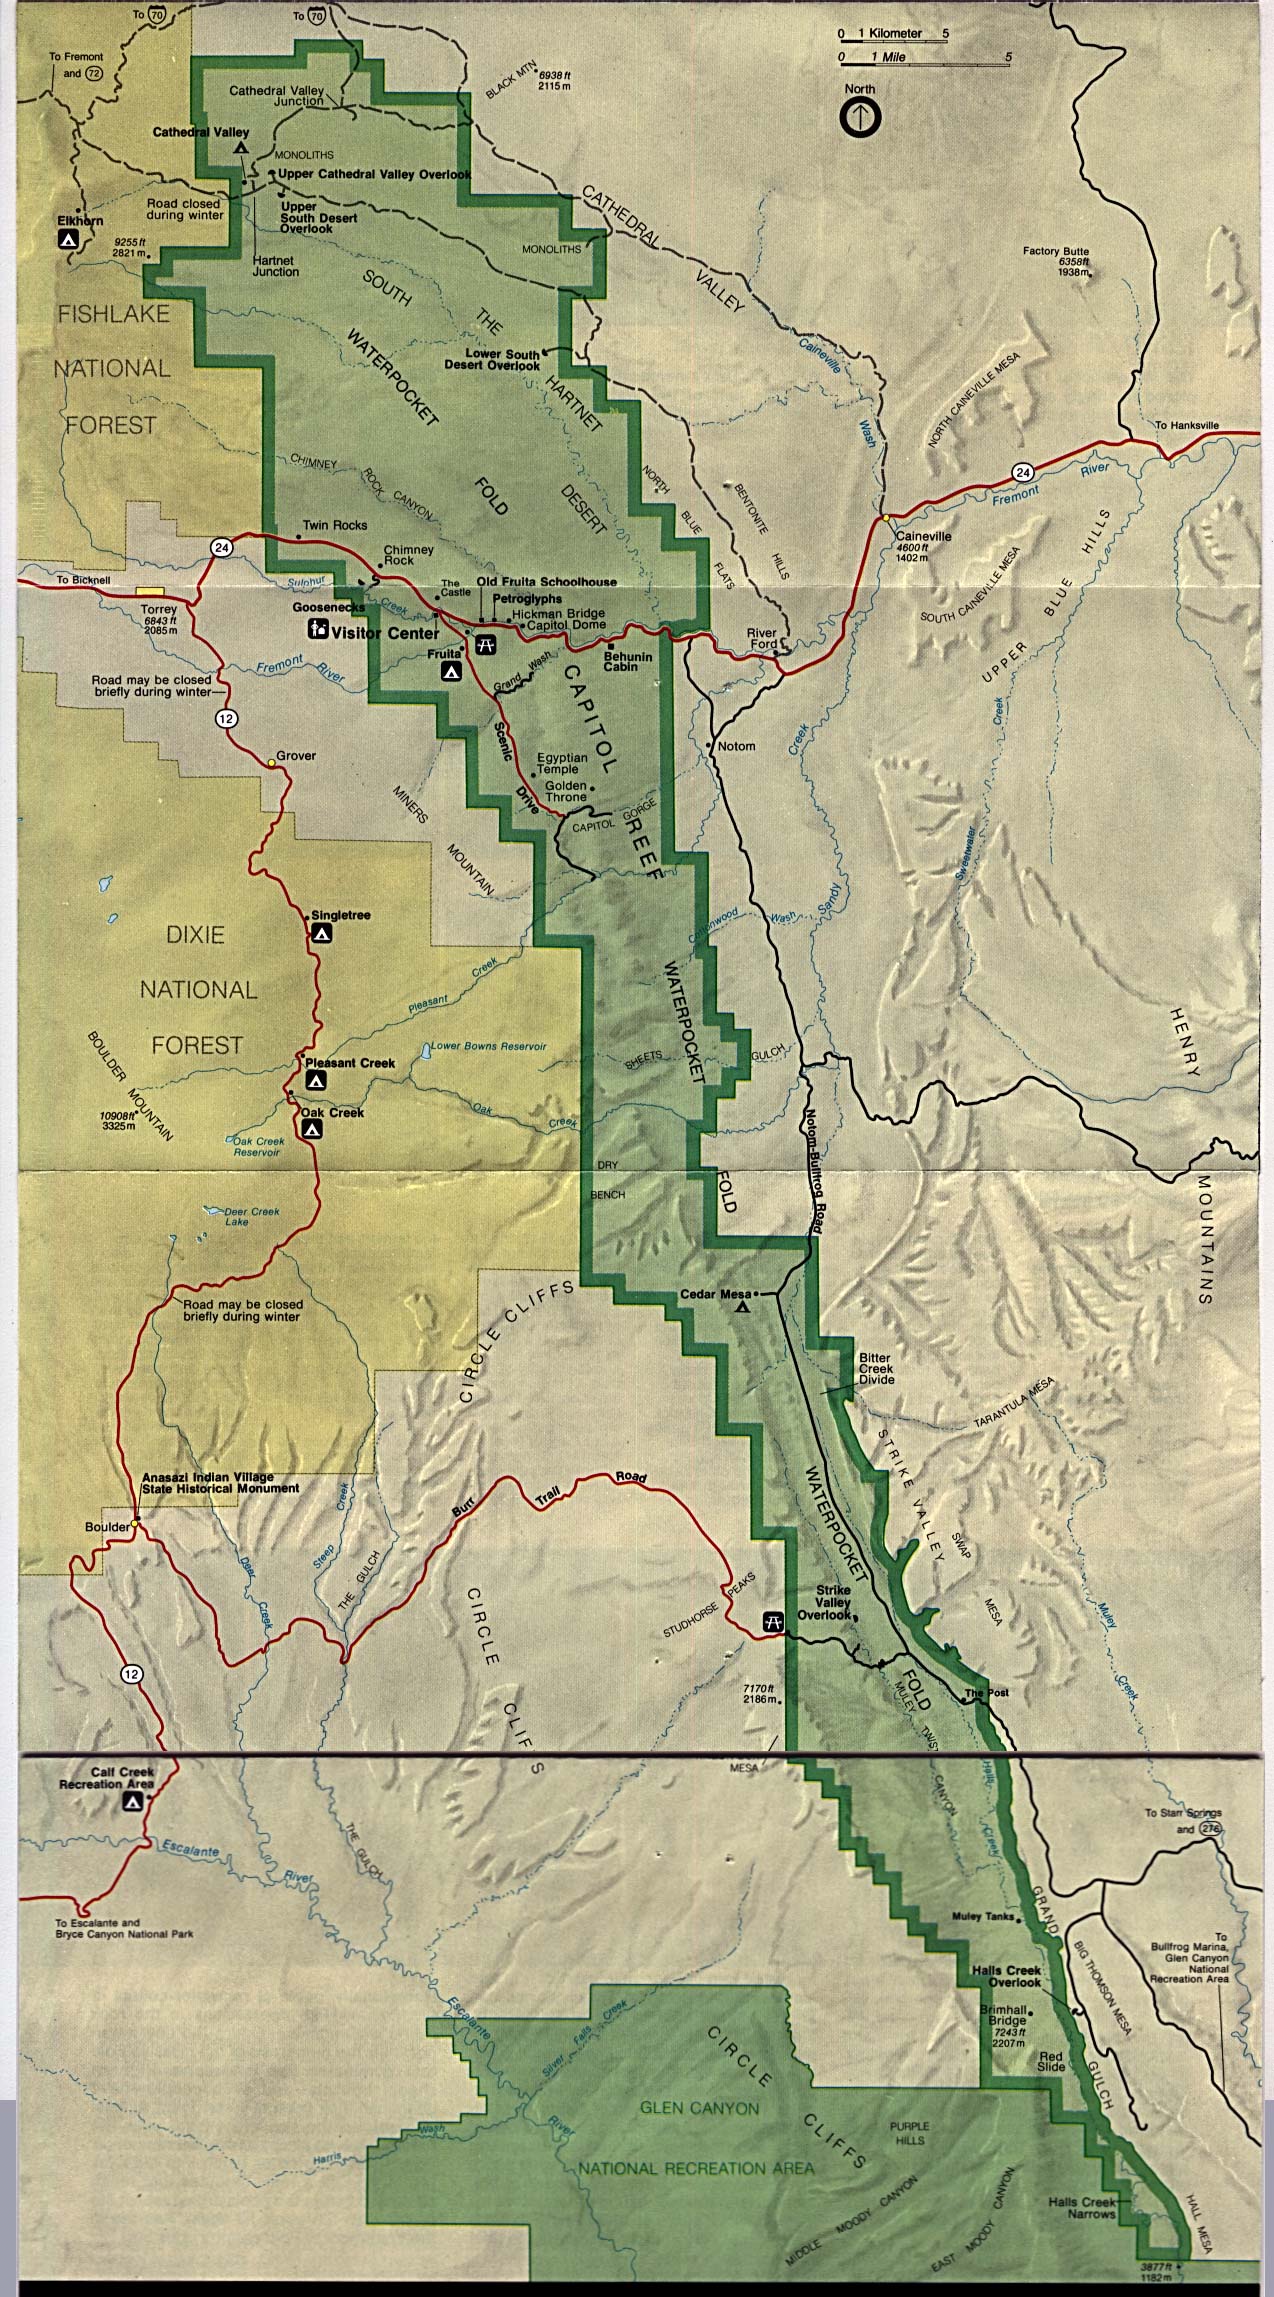  Maps of United States National Parks, Monuments and Historic Sites Capitol Reef National Park [Utah] (Park Map) 1995 (559K) 